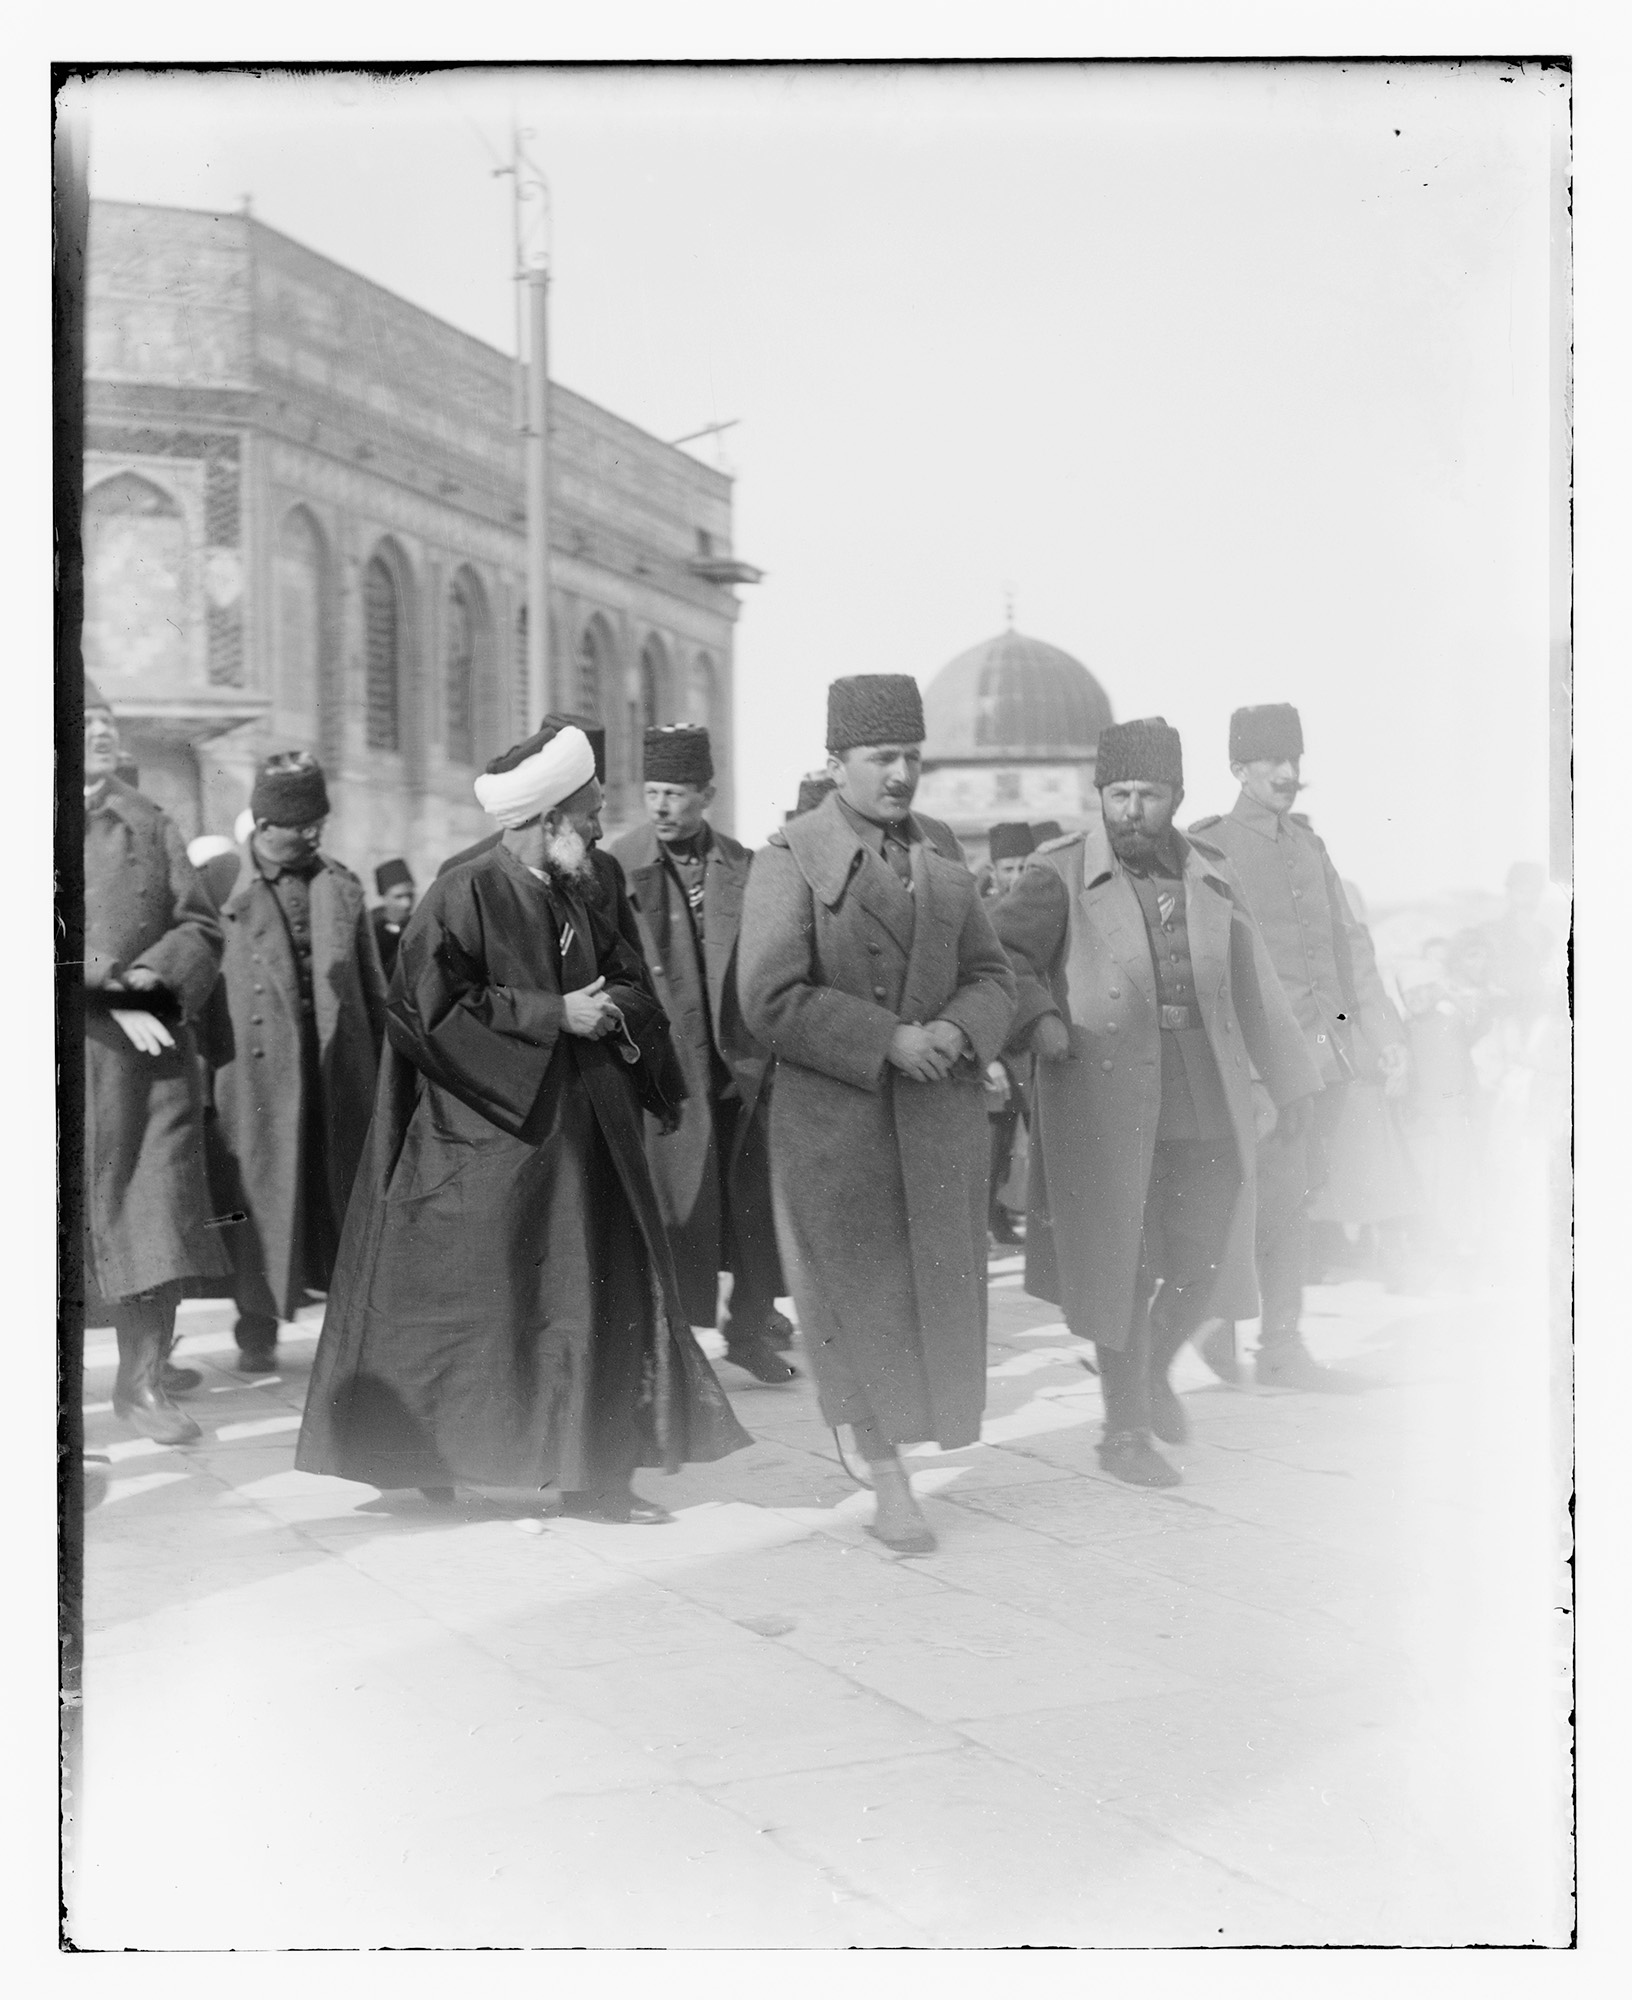 Black and white photograph of a group of men wearing heavy coats and fez hats walking away from a domed building.